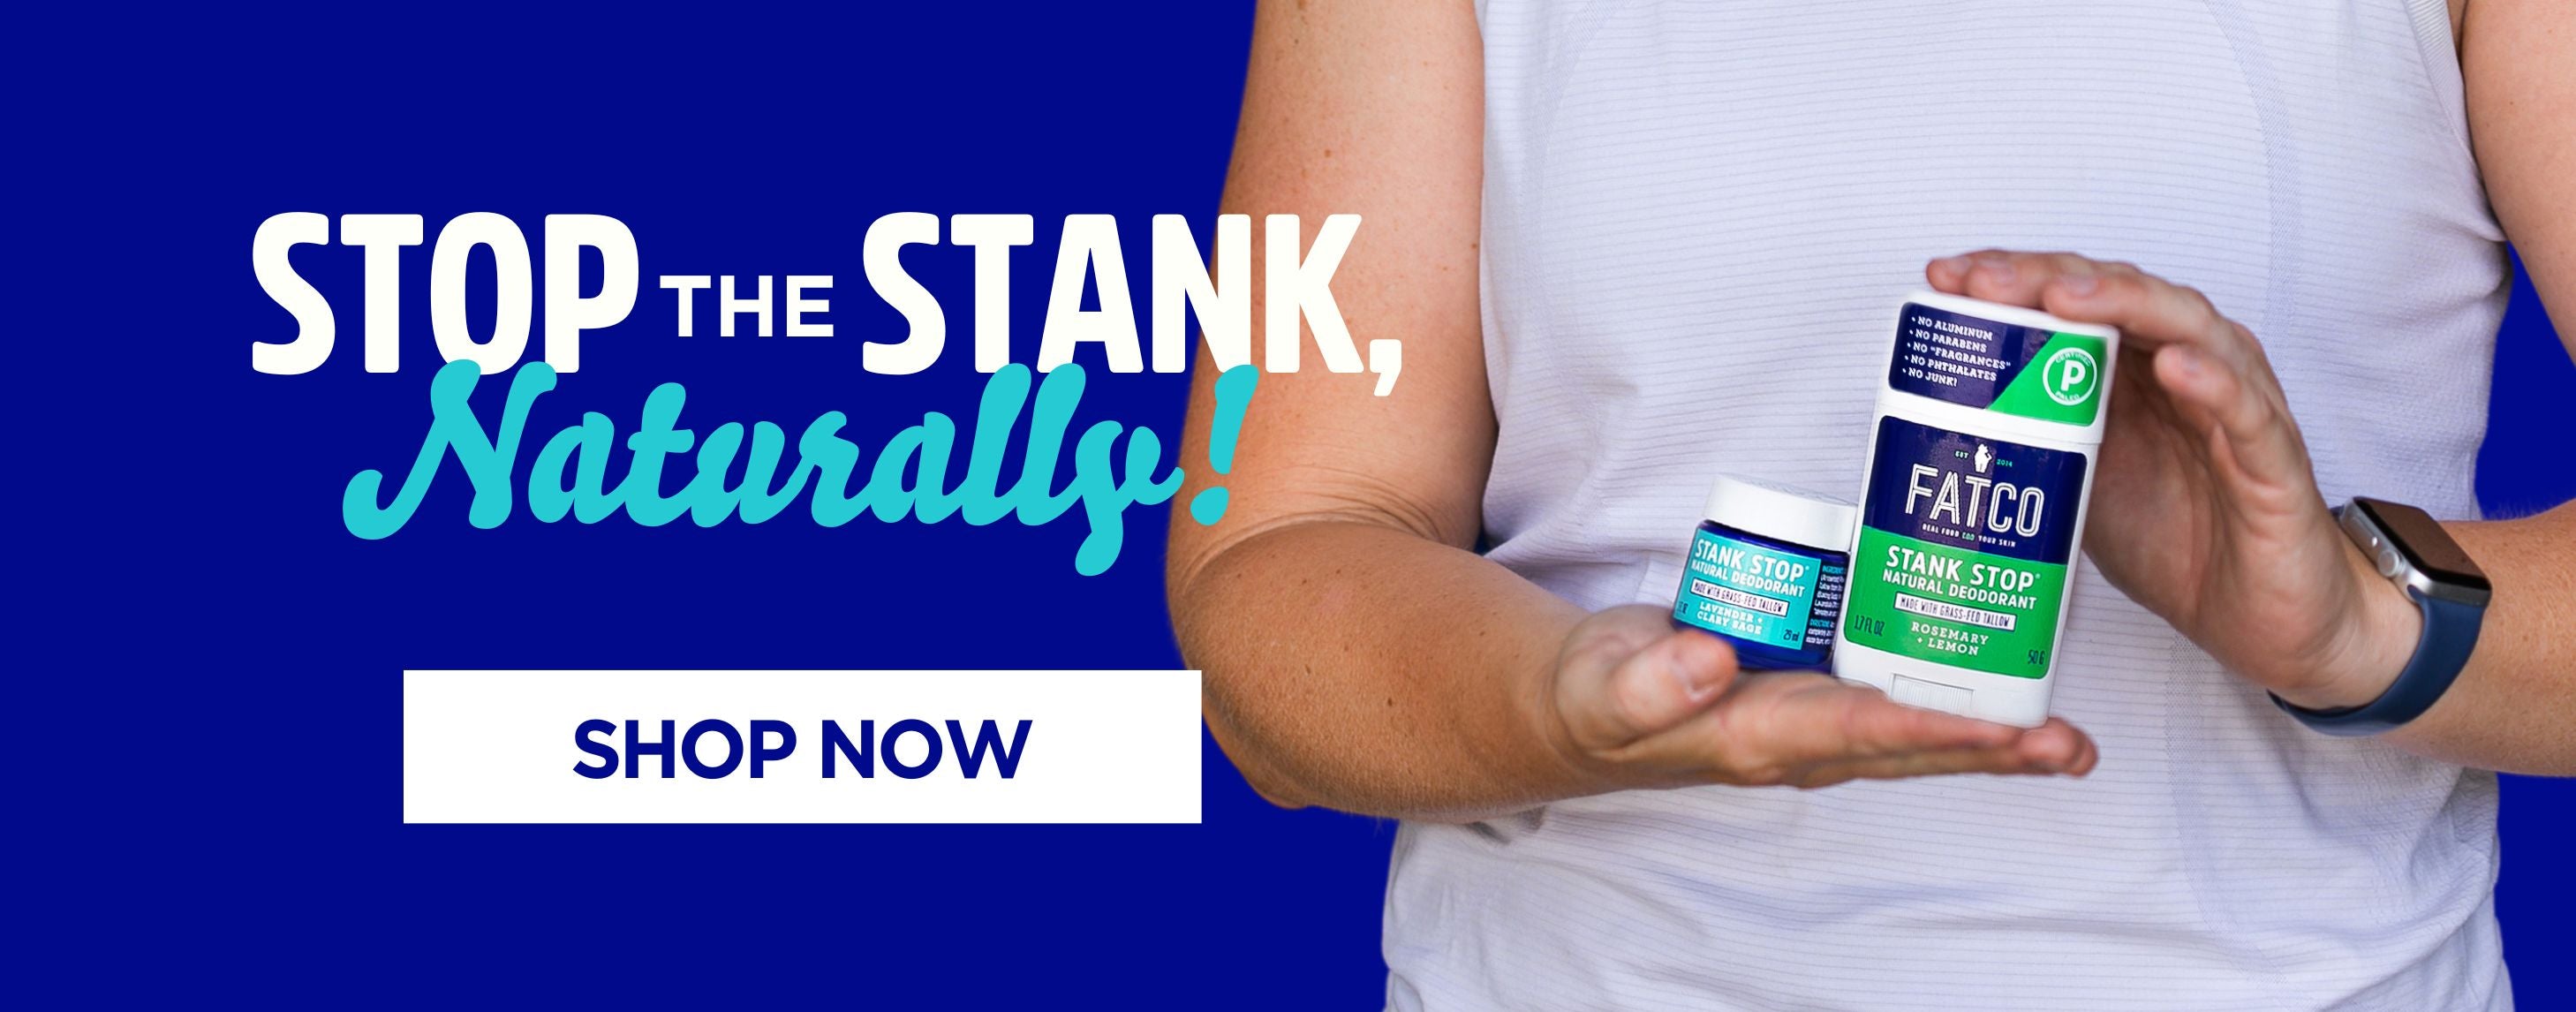 Stop the Stank, Naturally!